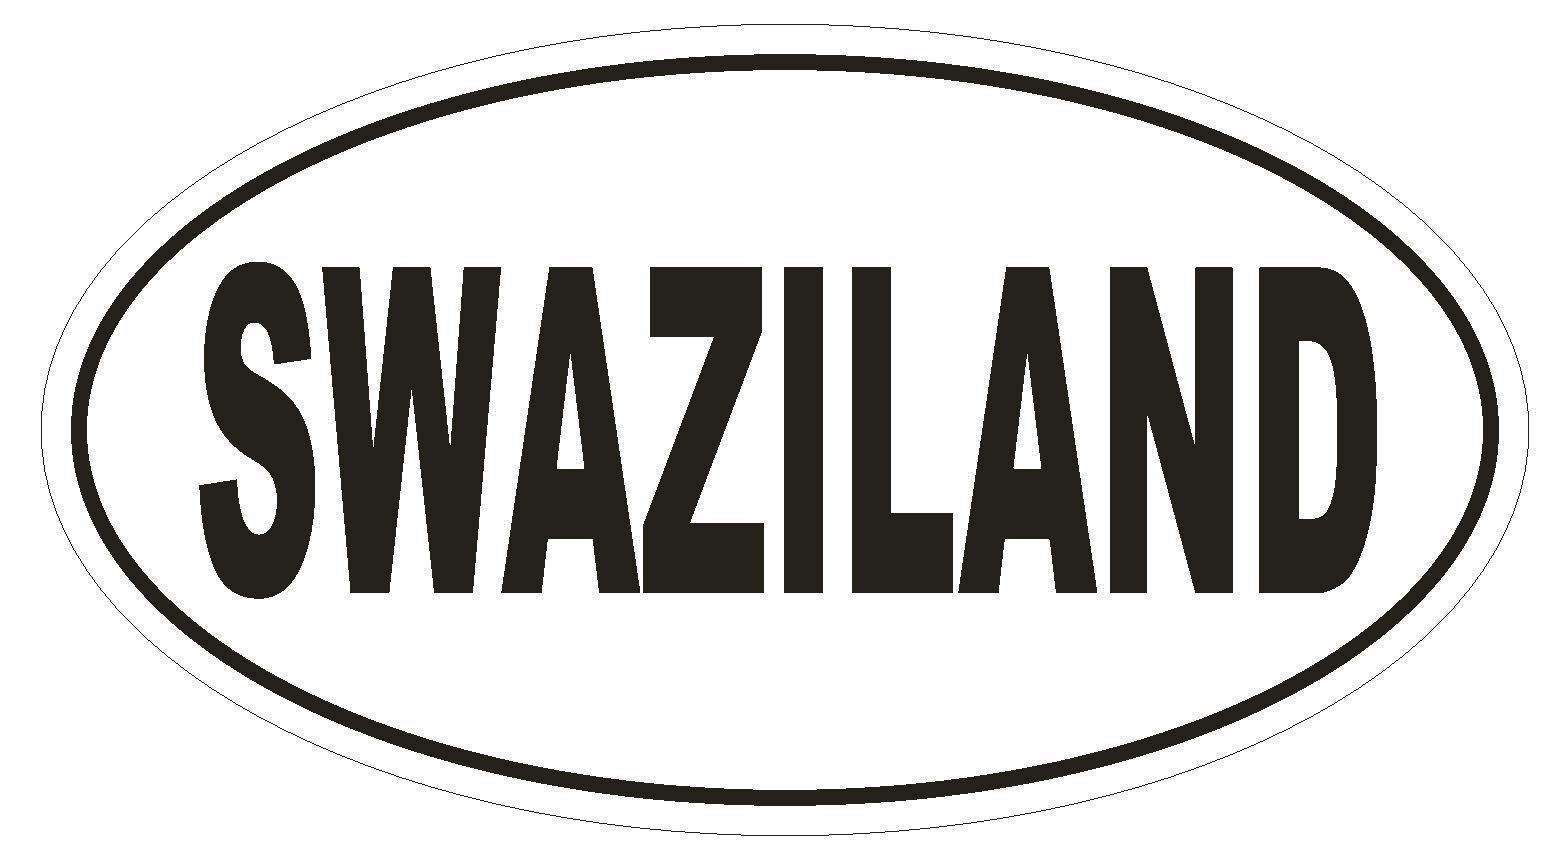 Primary image for Swaziland Oval Bumper Sticker or Helmet Sticker D2266 Euro Oval Country Code